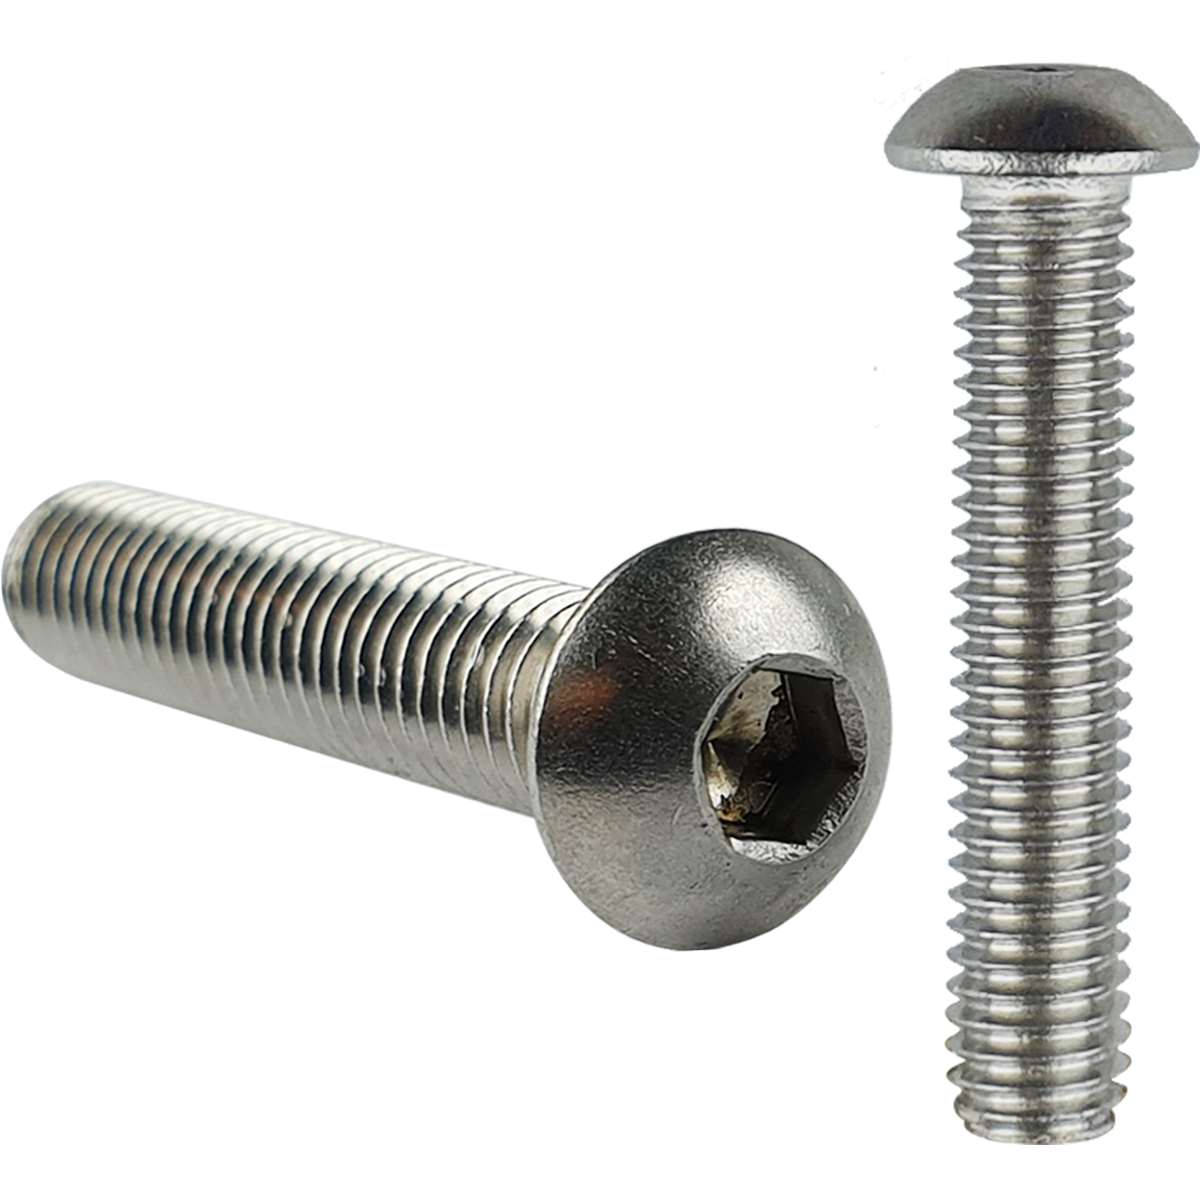 Corrosion resistant, metric, A2 stainless steel socket button head machine screw. A machine screw with a button head for a snag free finish.